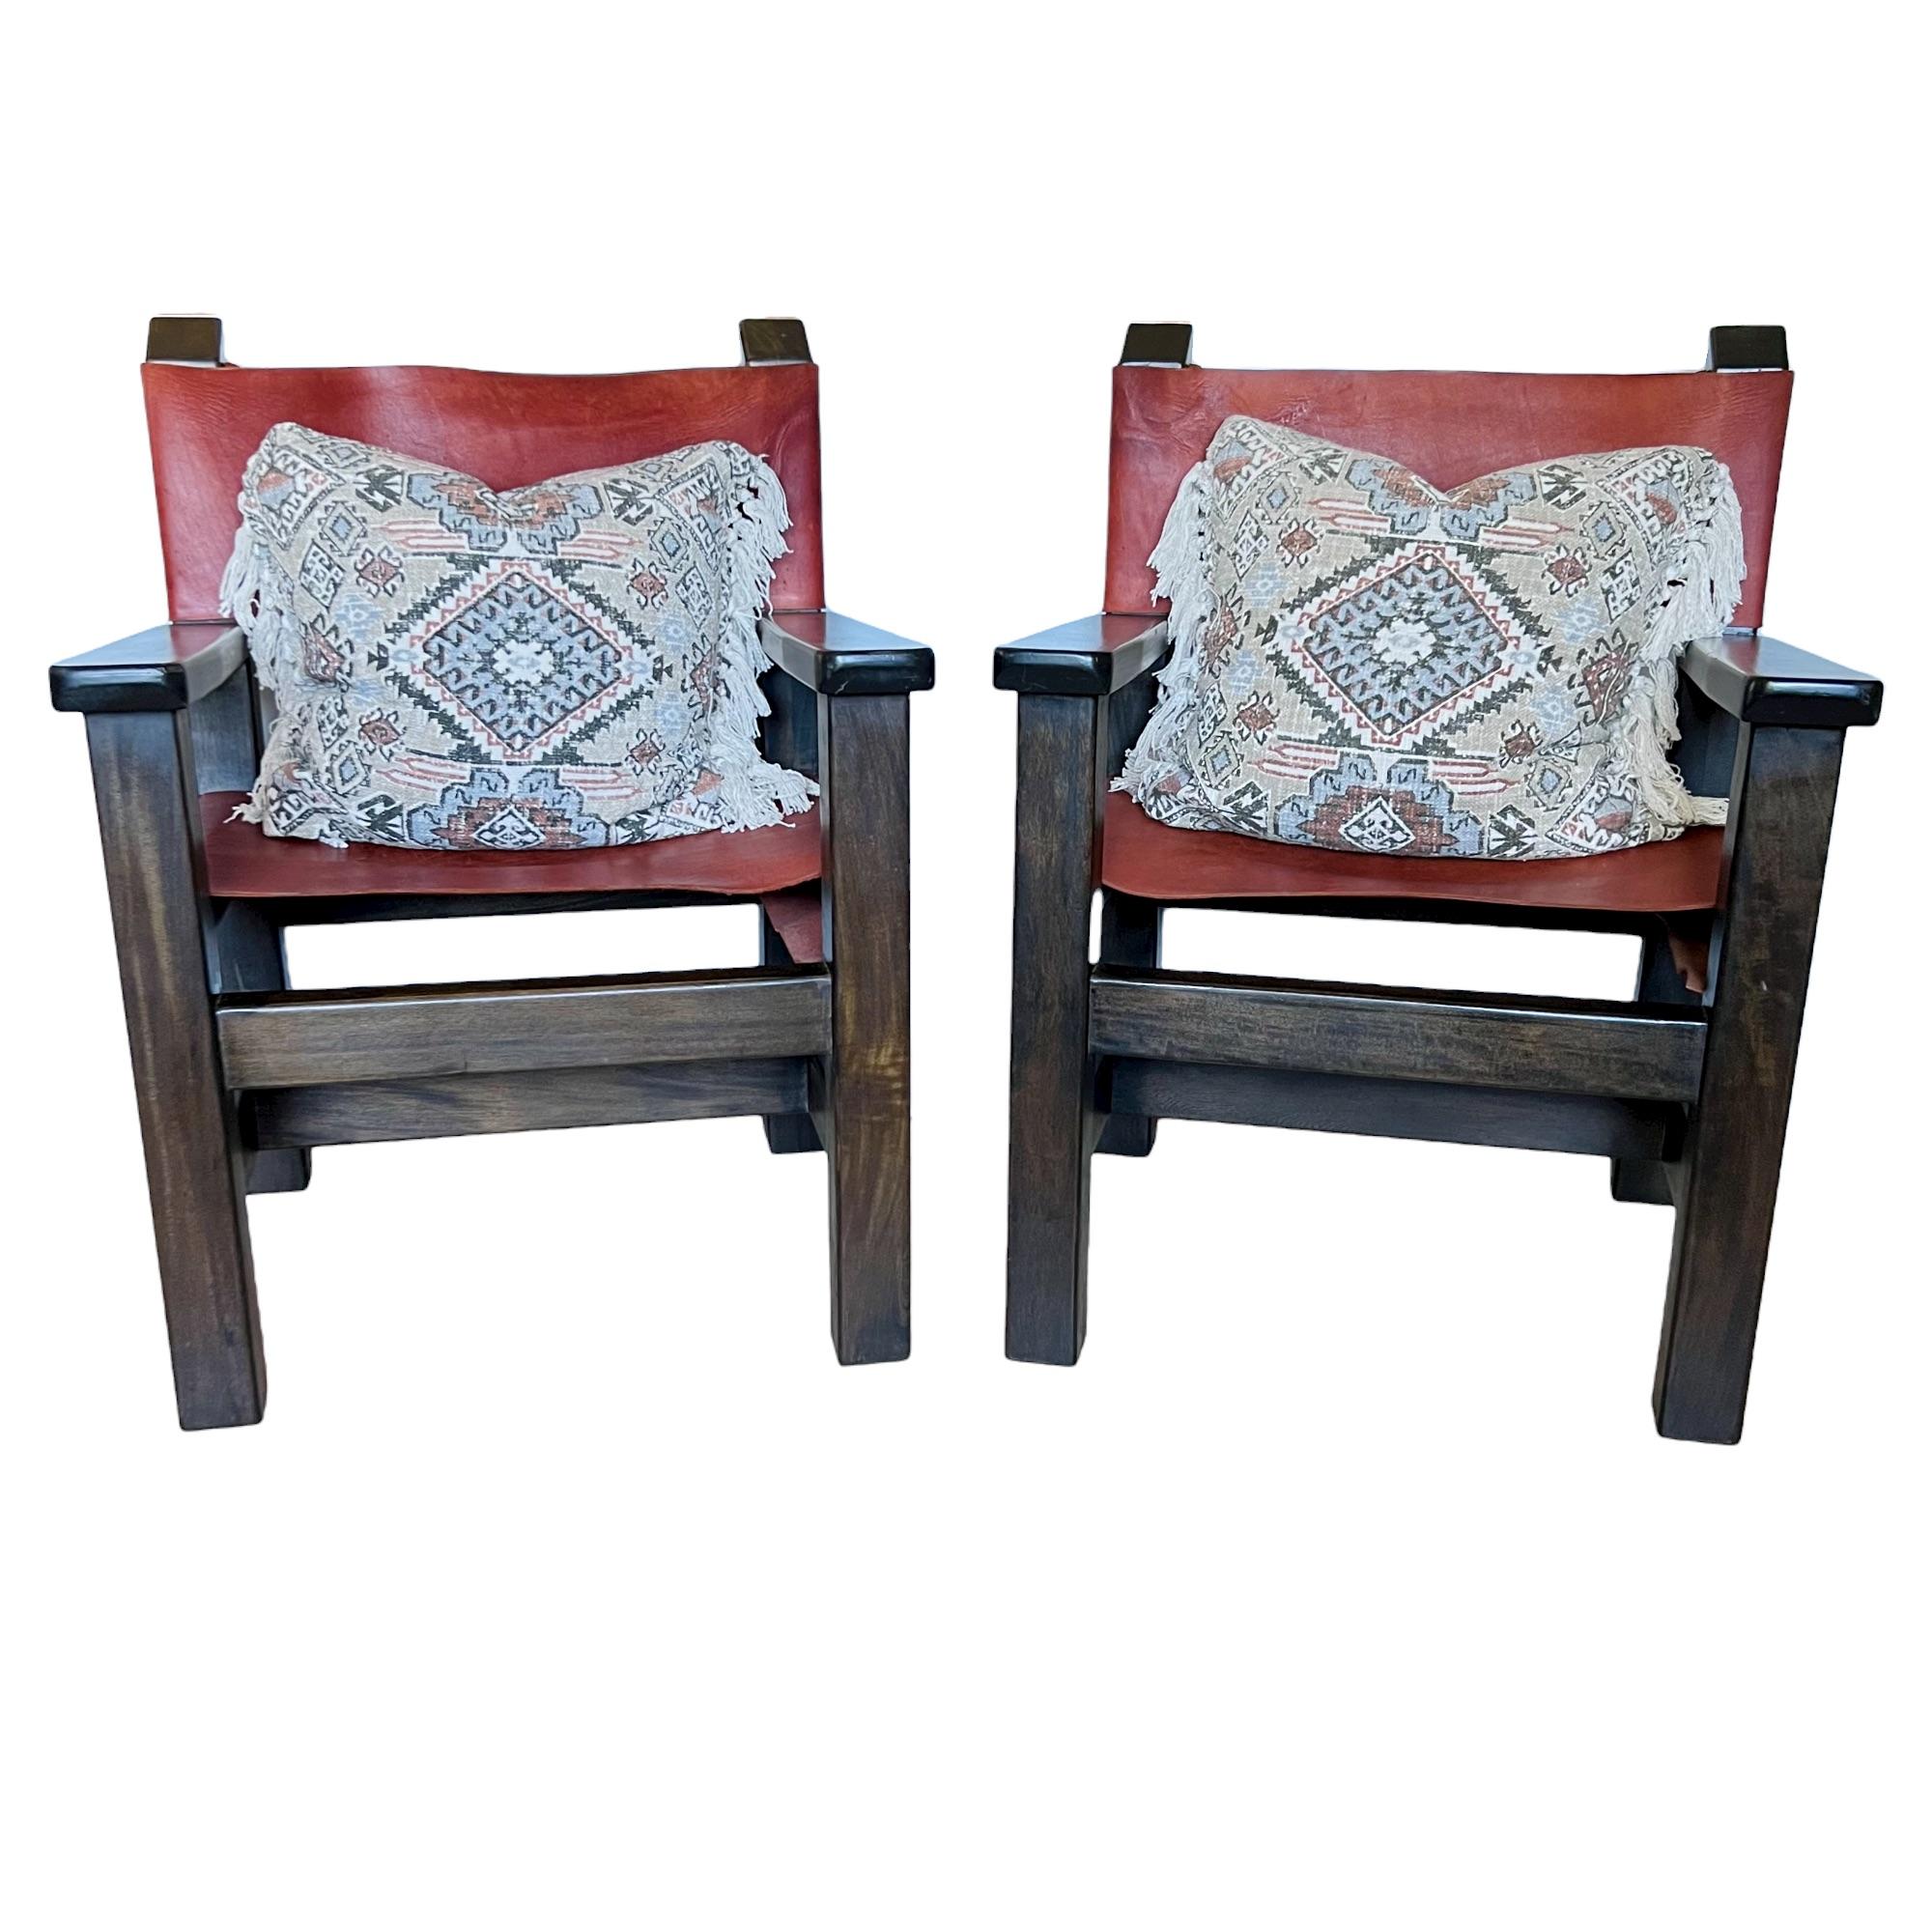 A late 20th century pair of large, sturdy Spanish brutalist director's style armchairs. Dark wood frames with cognac saddle leather chair backs and seats.

Dimensions: 26.75